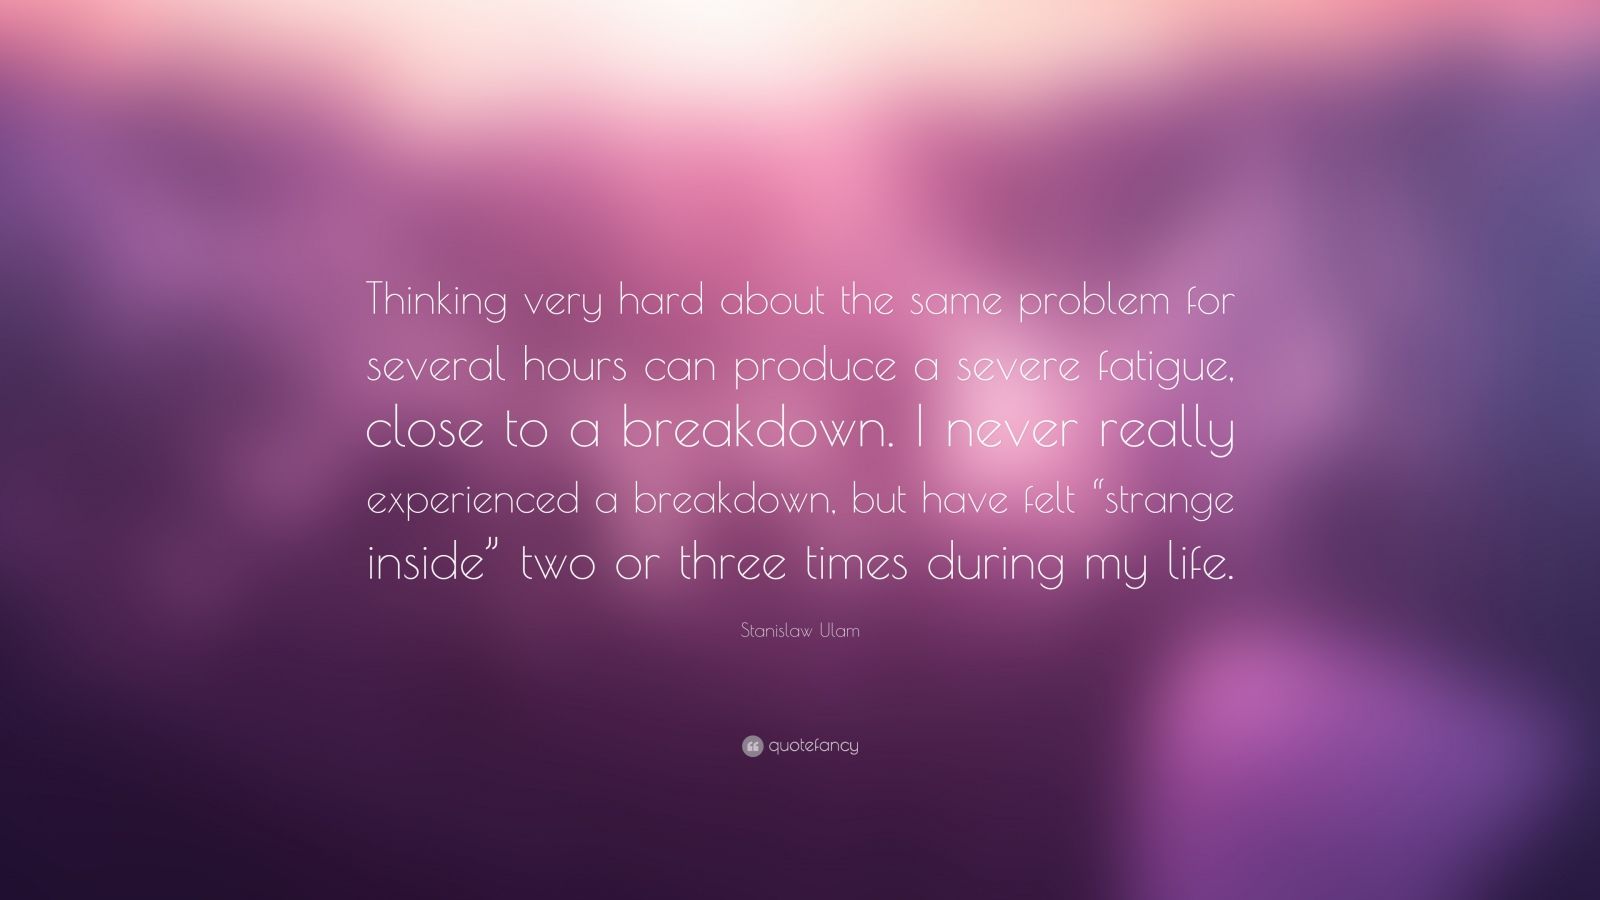 Stanislaw Ulam Quote: “Thinking very hard about the same problem for ...